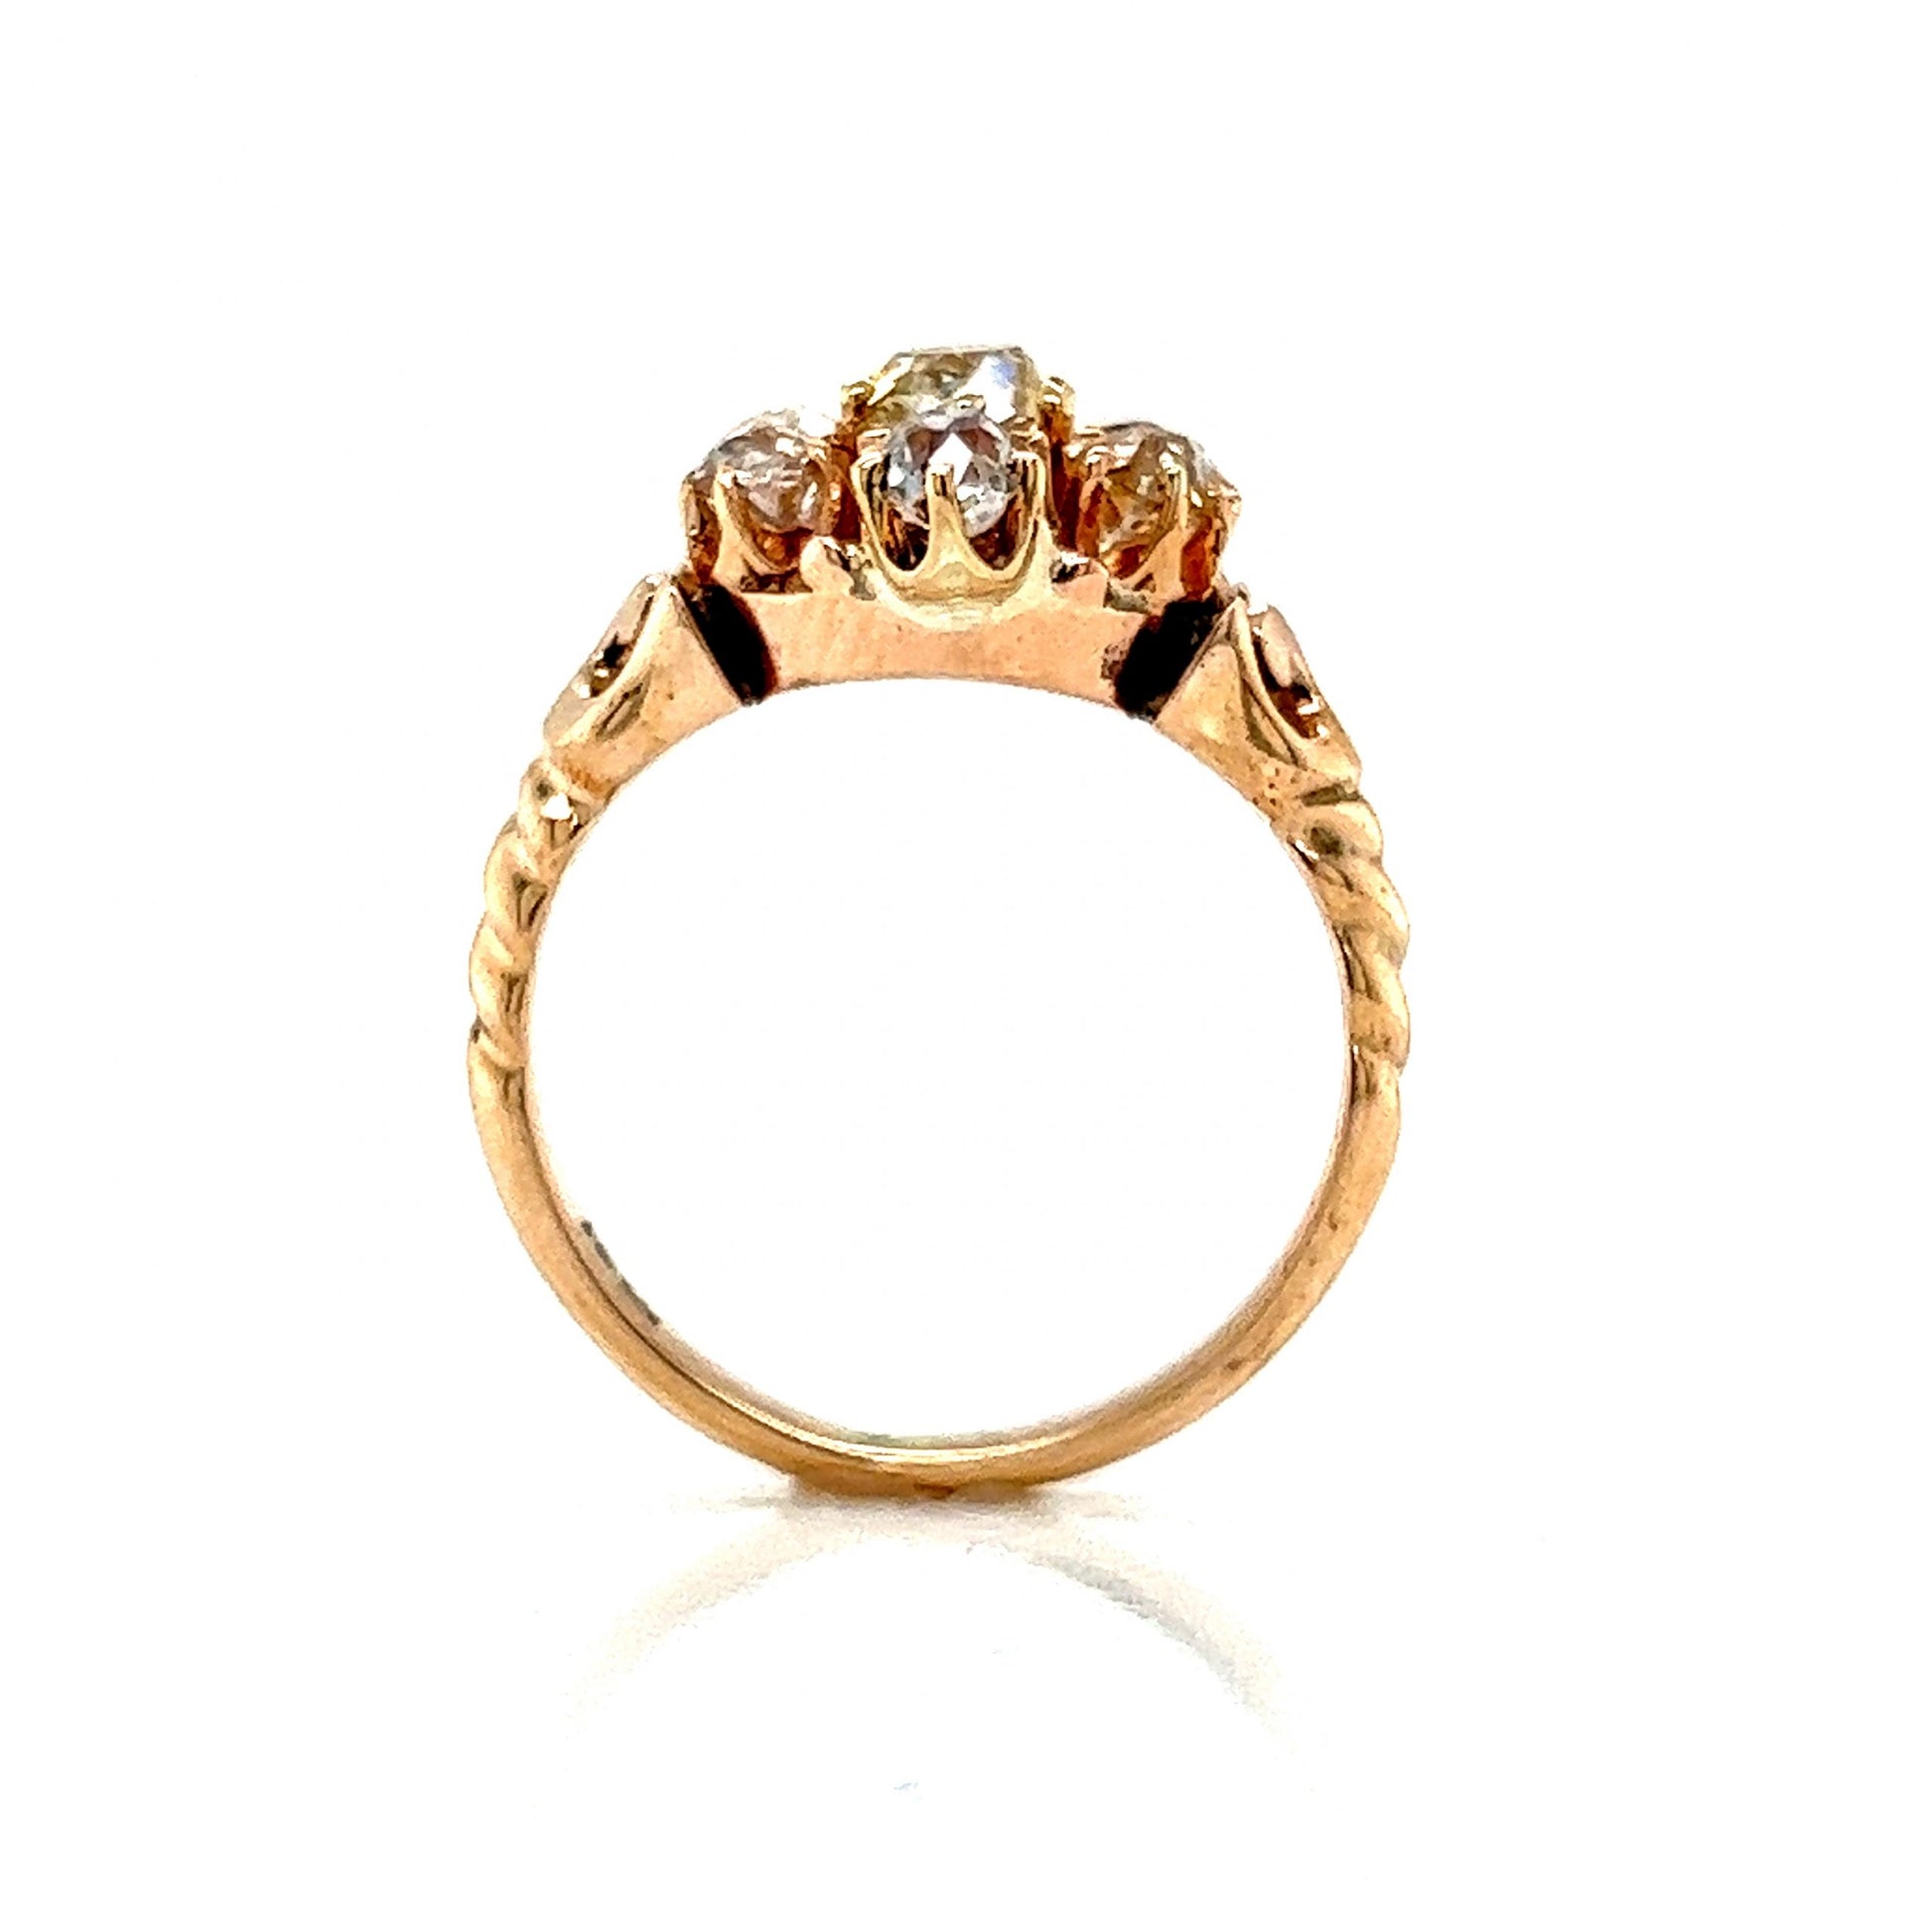 Victorian Cluster Diamond Ring in 14k Yellow GoldComposition: 14 Karat Yellow GoldRing Size: 6Total Diamond Weight: 1.40 ctTotal Gram Weight: 4.0 gInscription: 14k